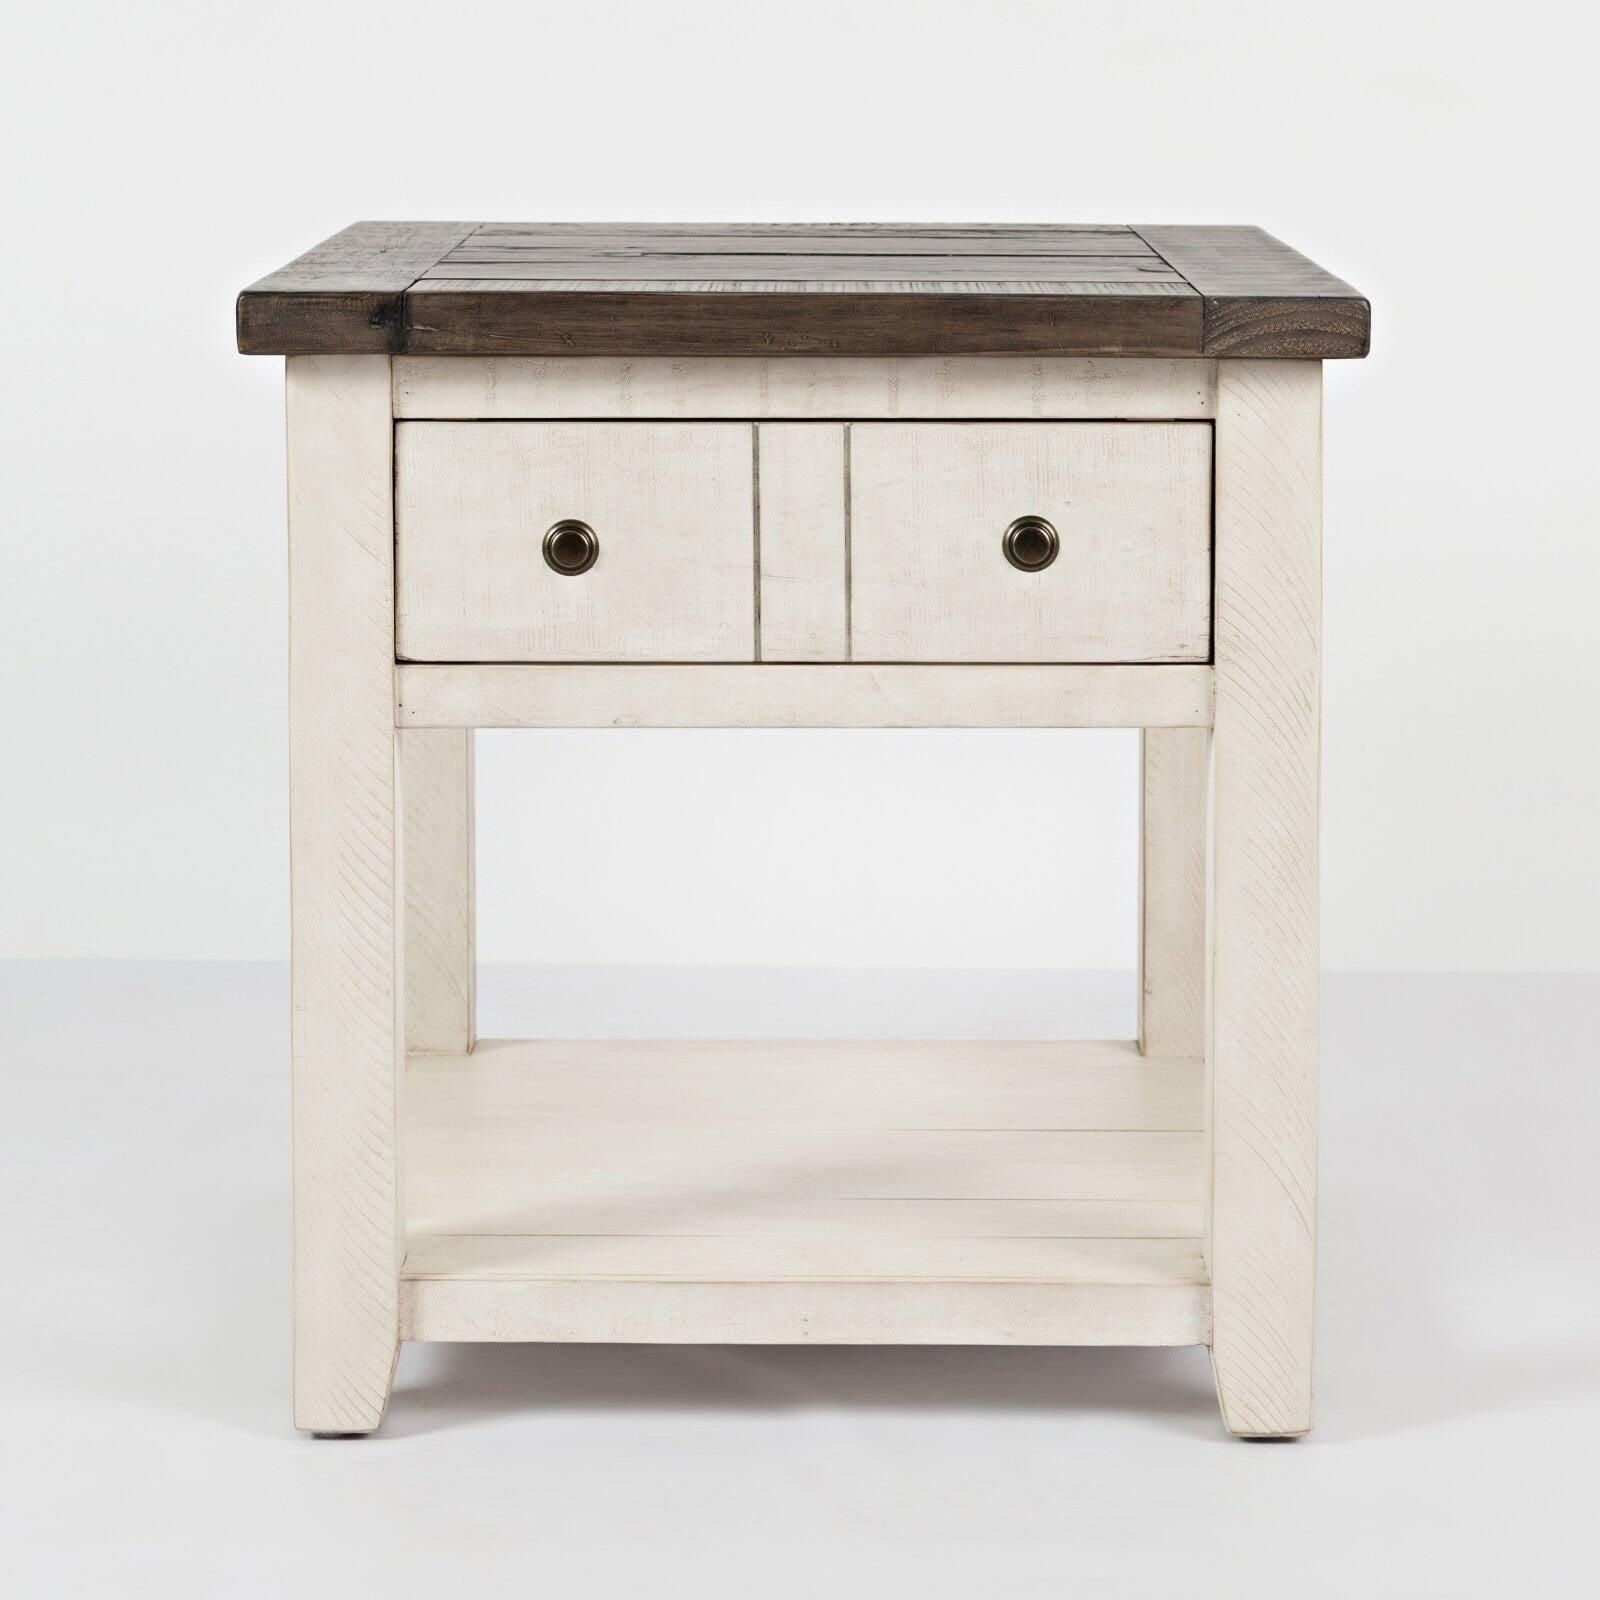 Vintage White Rustic Square End Table with Storage